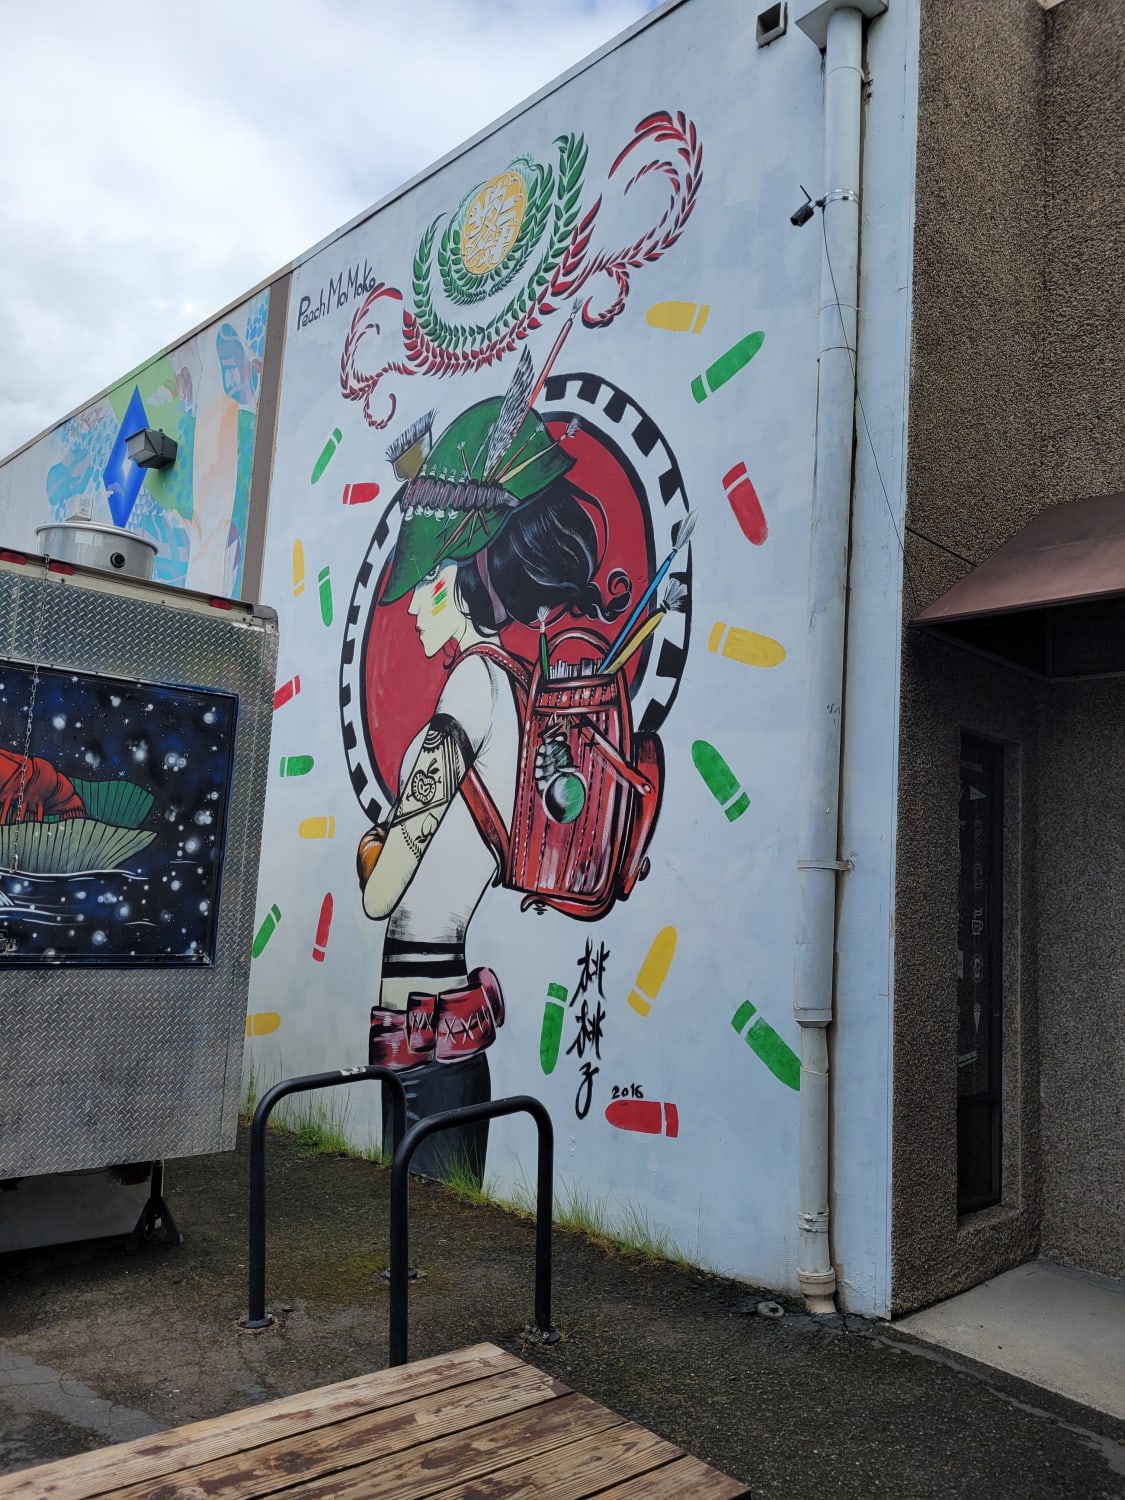 Not a comic but found a mural today done by Peach Momoko!